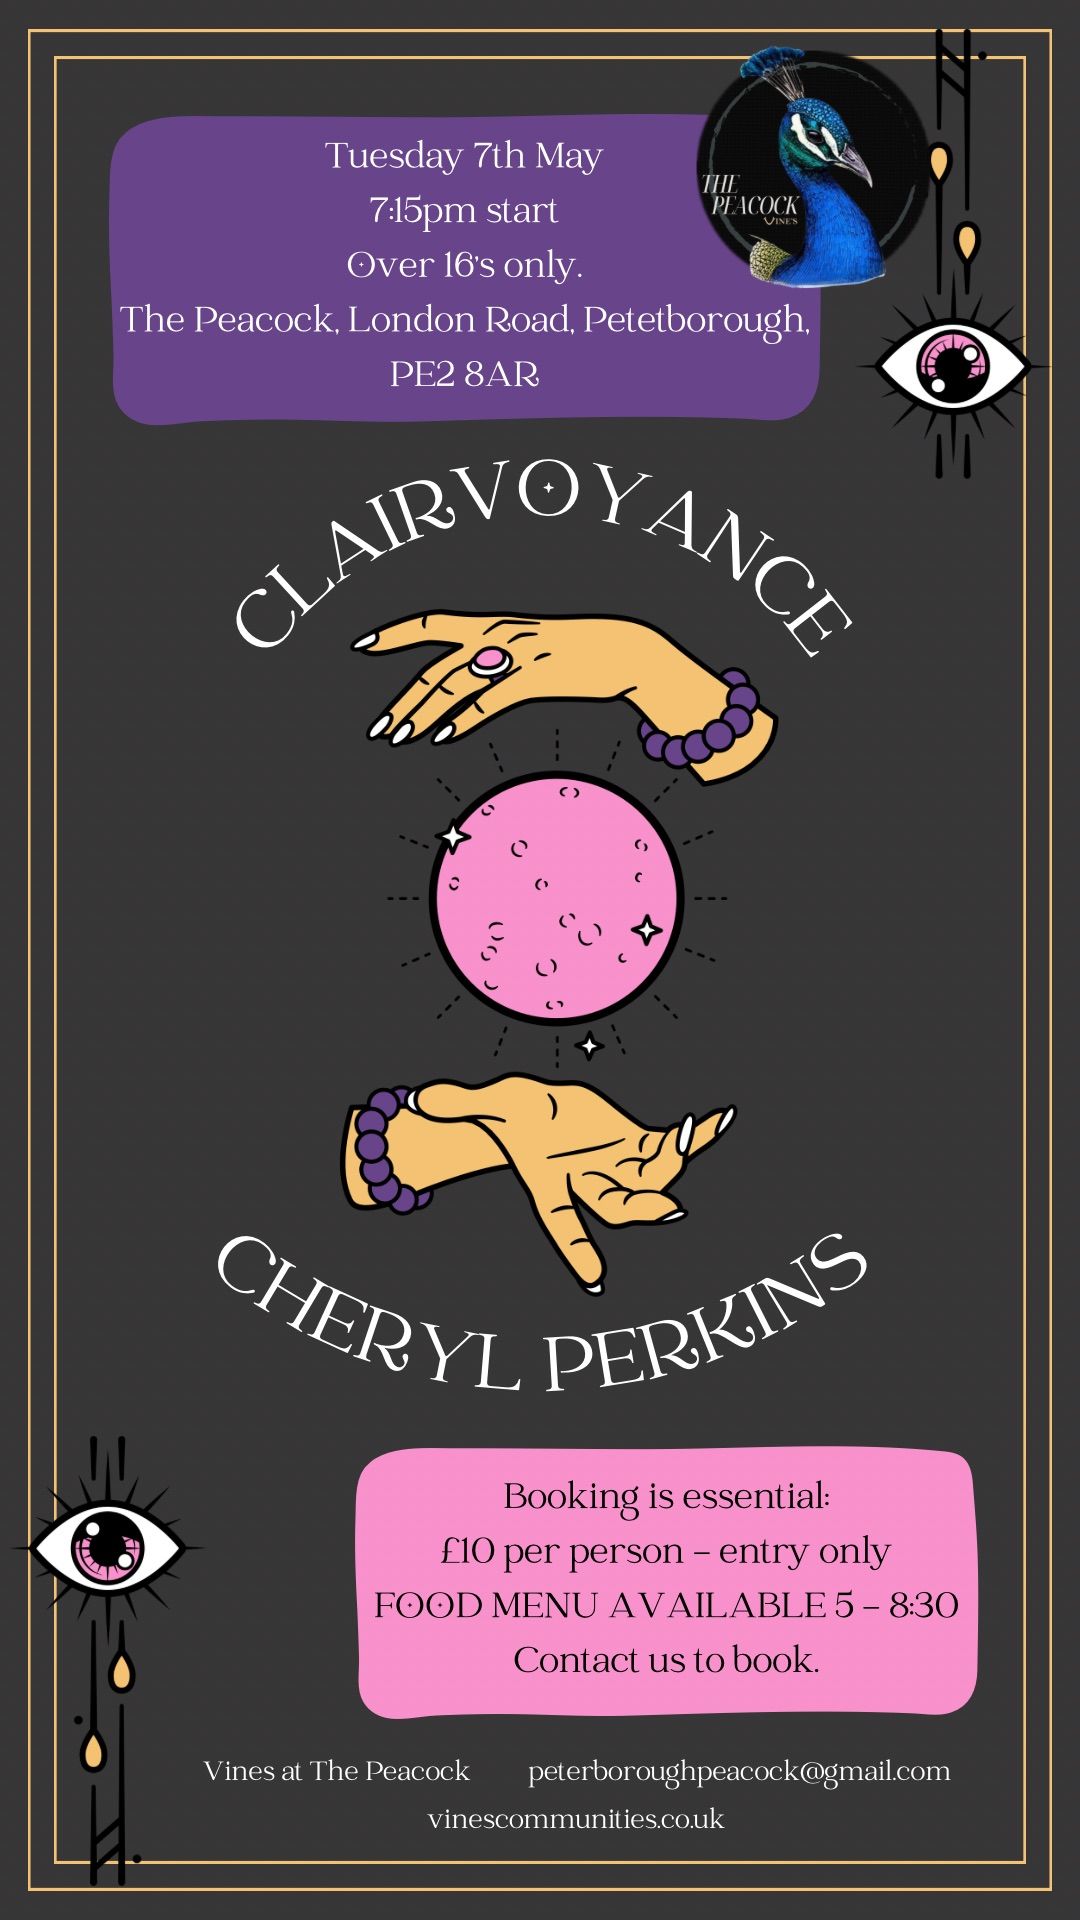 Clairvoyance with Cheryl Perkins ?